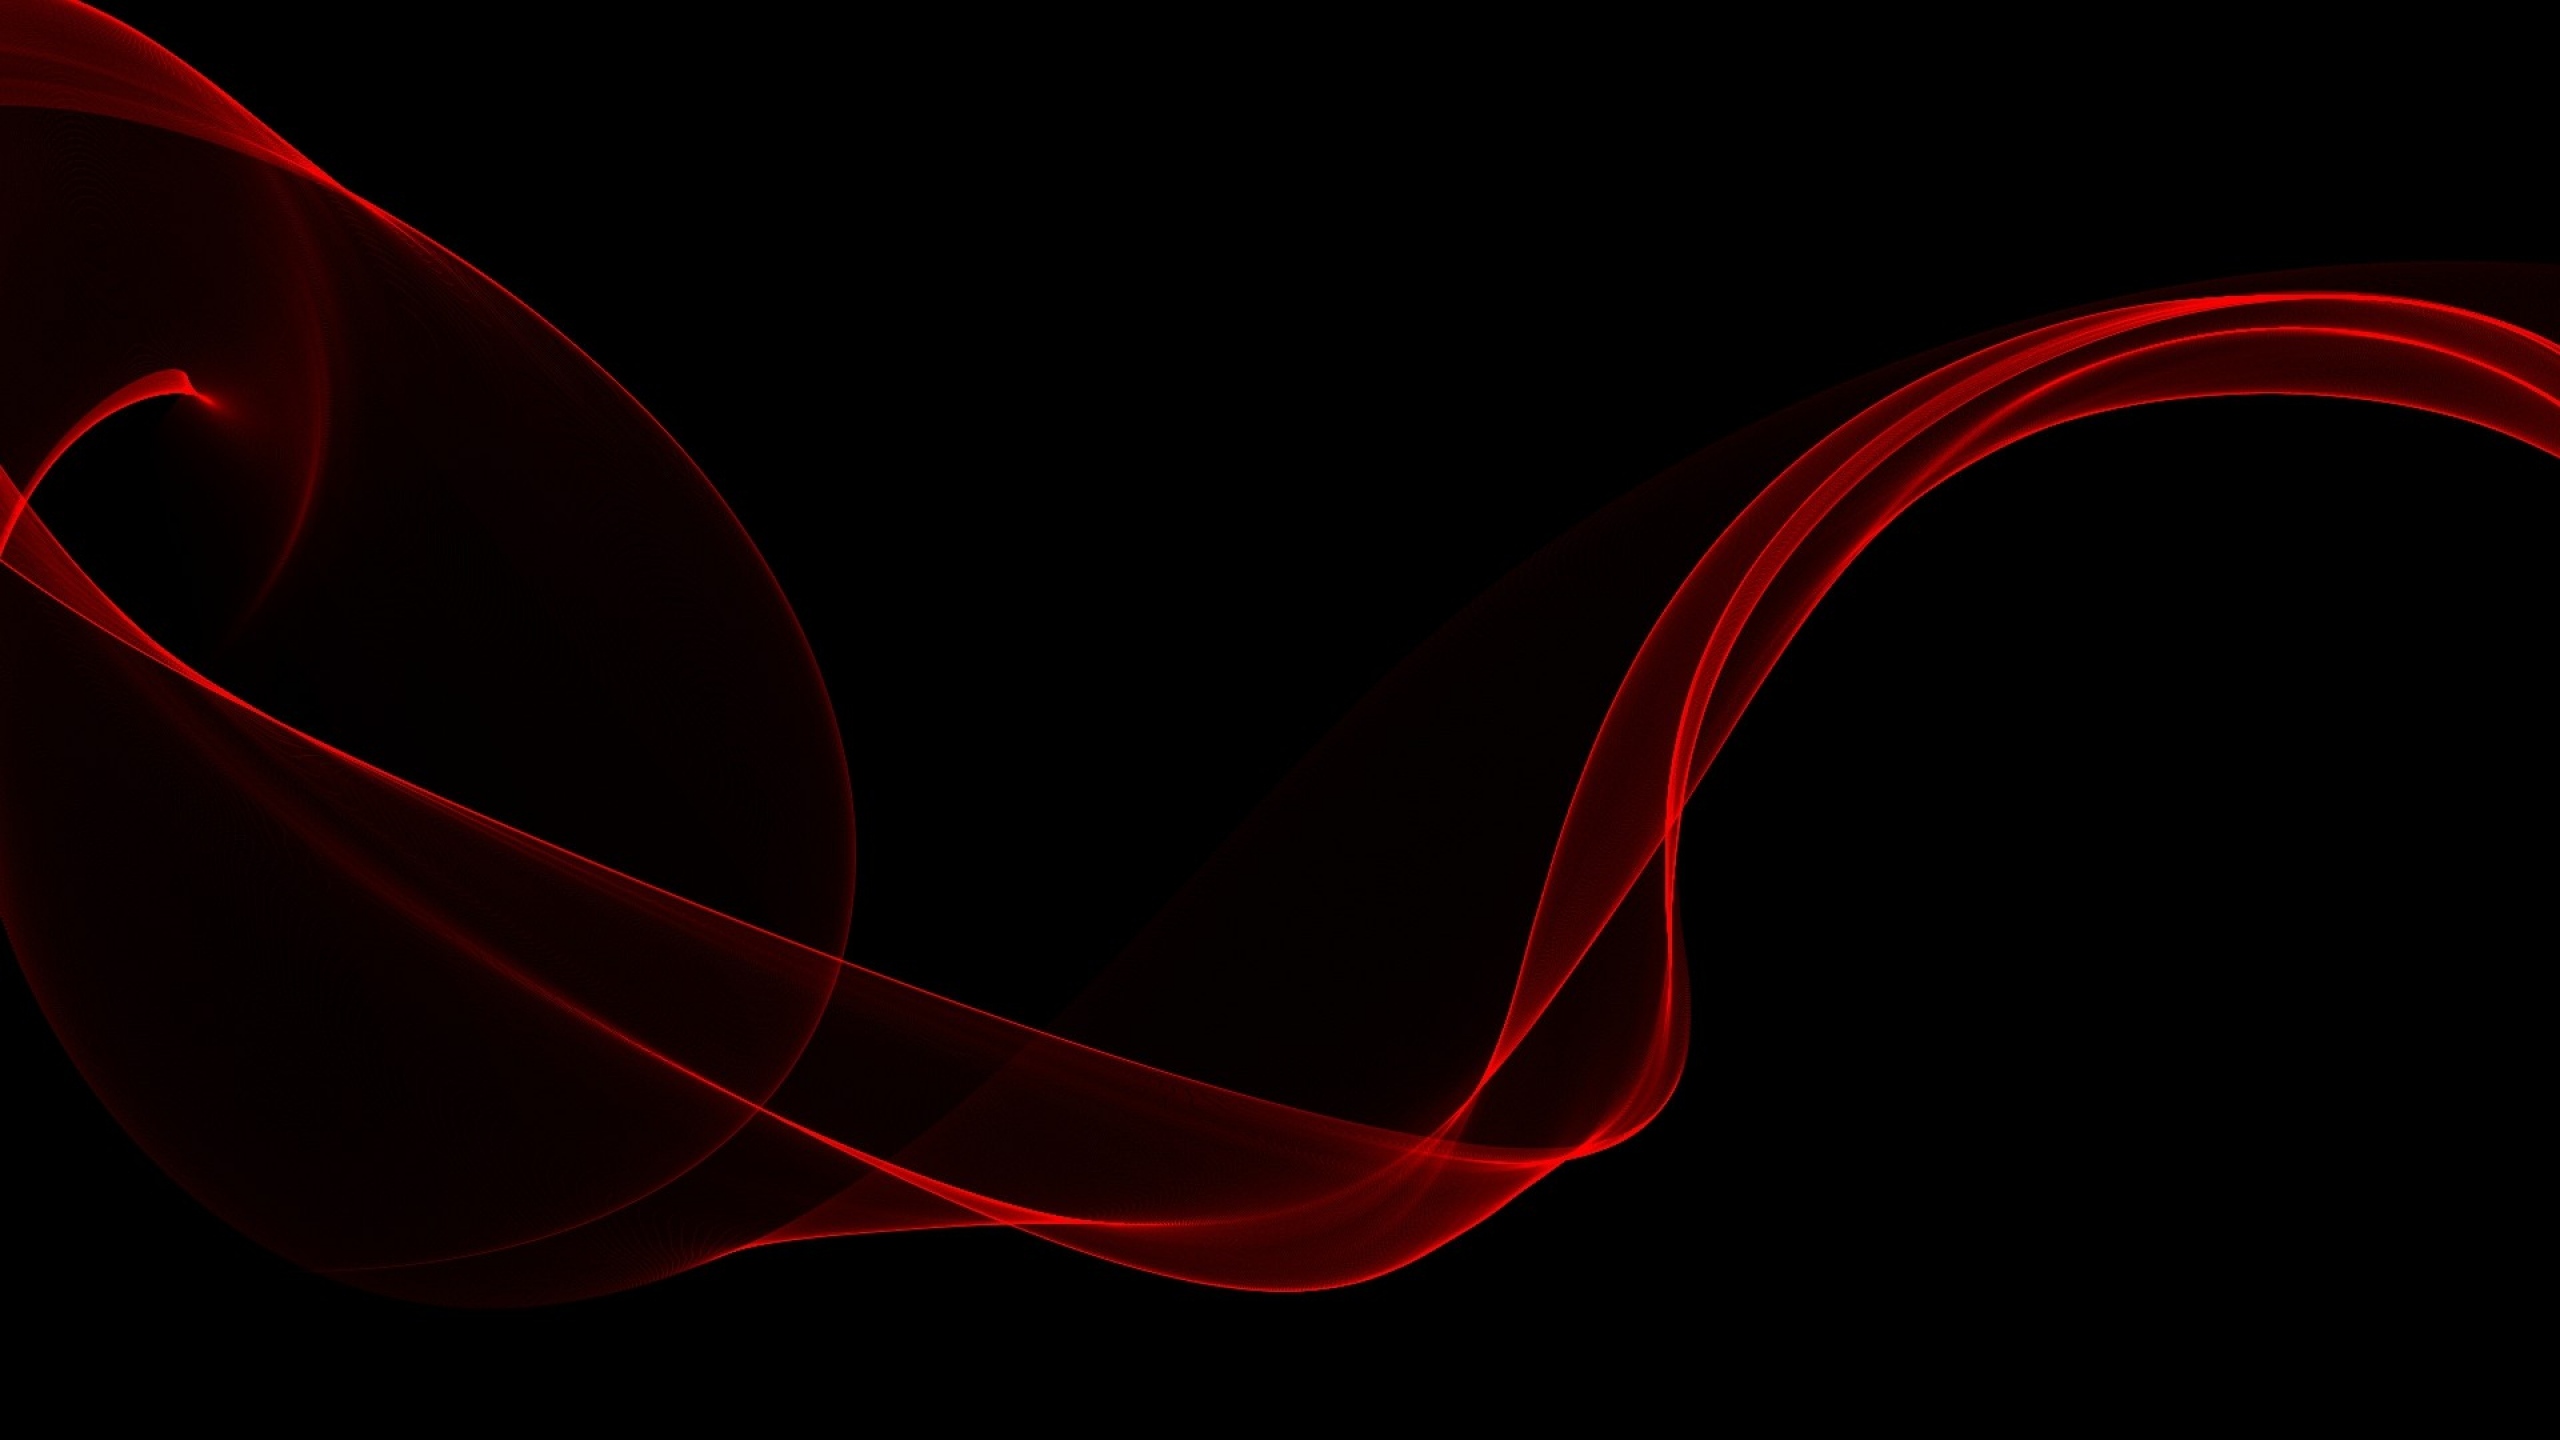 Abstract Dark Red Wallpaper IBackground